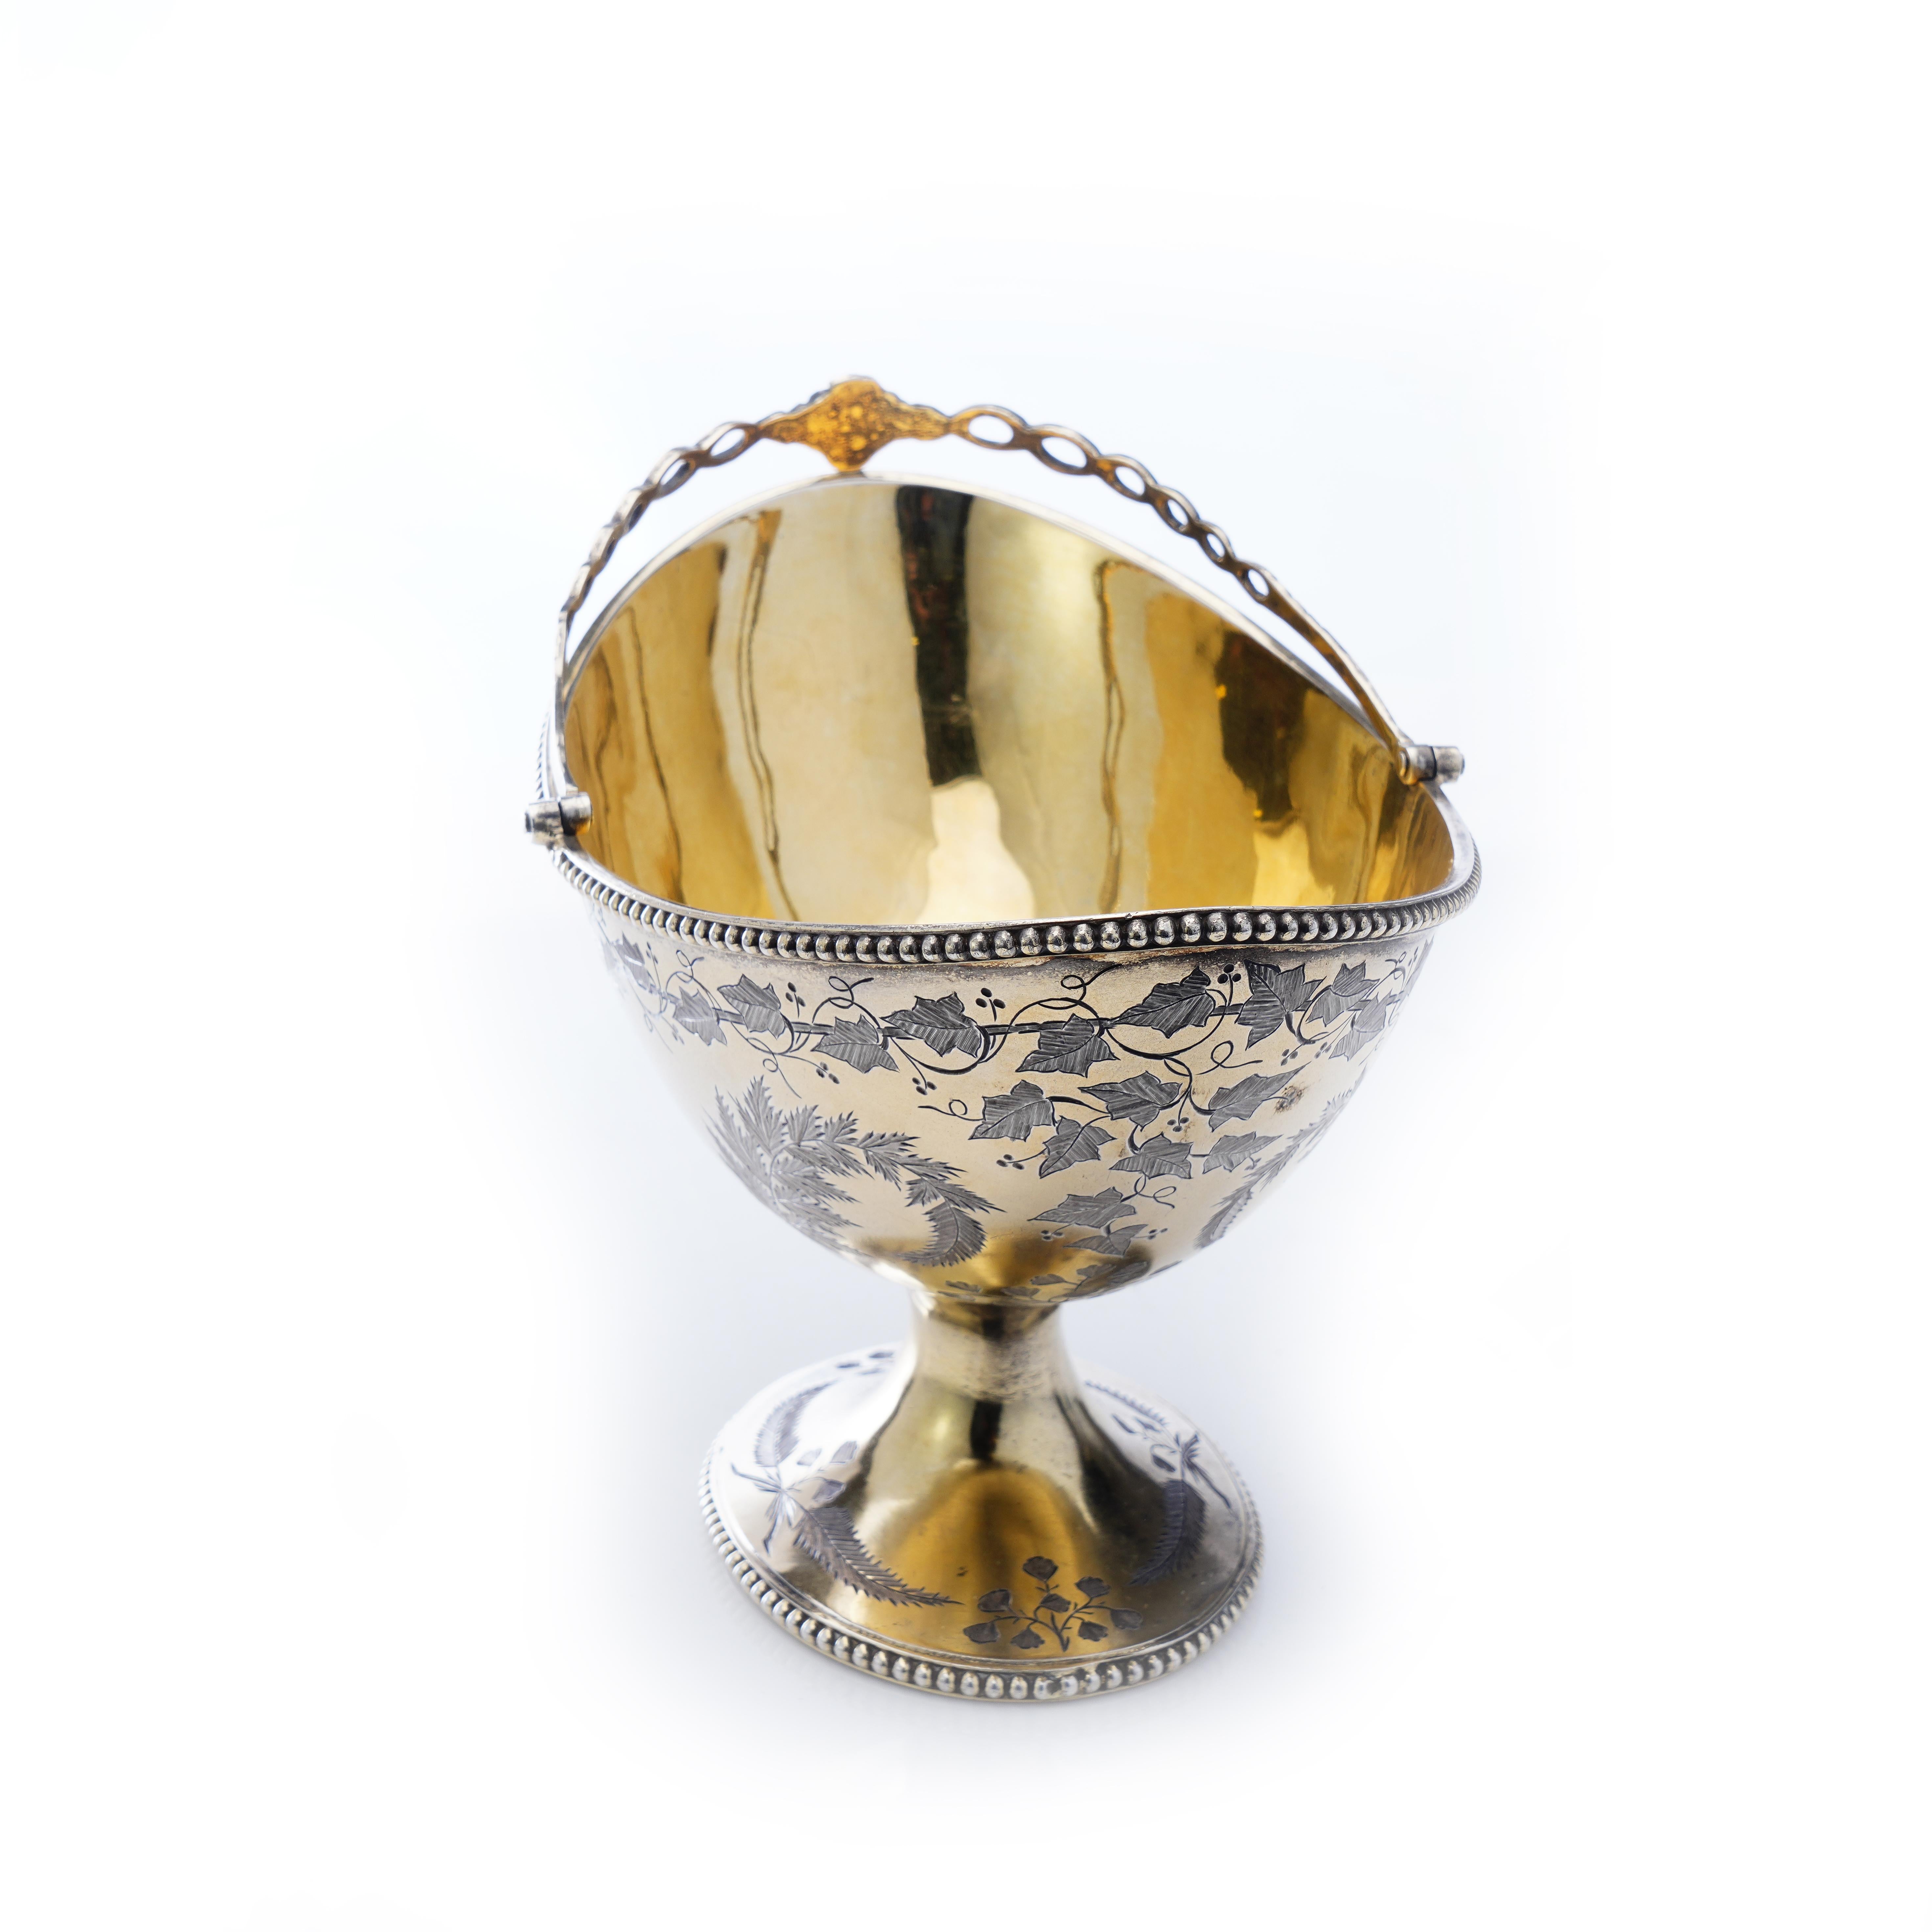 Antique Victorian silver gilt swing handle basket with engraved grape leaves and floral motifs.
Maker: Thomas Smily
Made in England, London, 1873
Fully hallmarked.

Dimensions -
Length x width x height: 16.5 x 11 x 11.5 cm
Weight: 282 grams